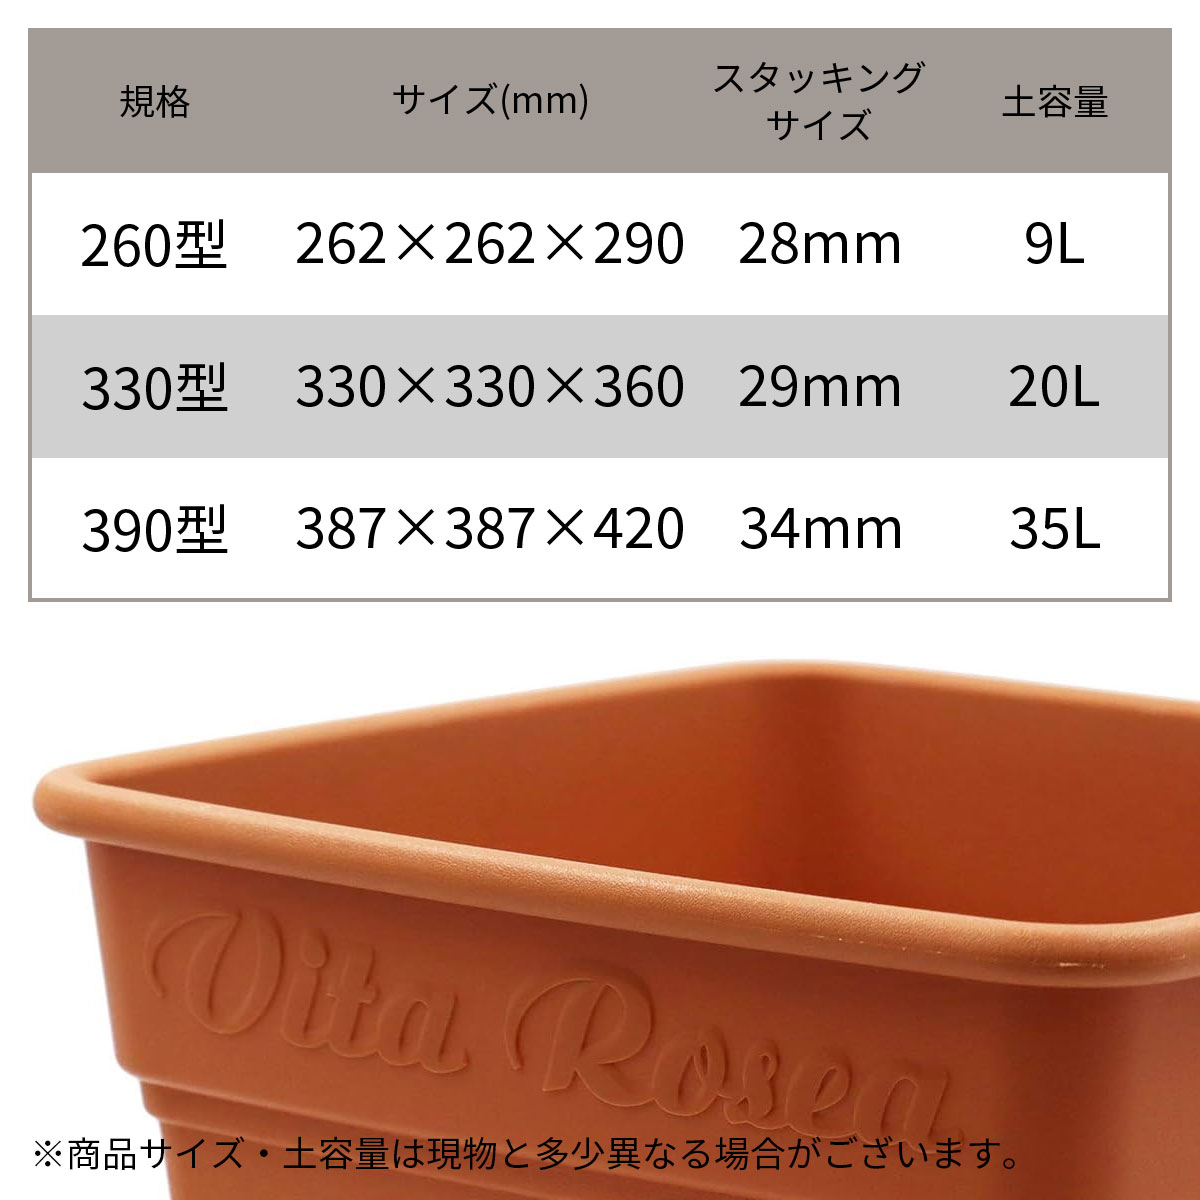 ro there square 390 type green Apple wear -387×387×420 earth capacity 35L pot 